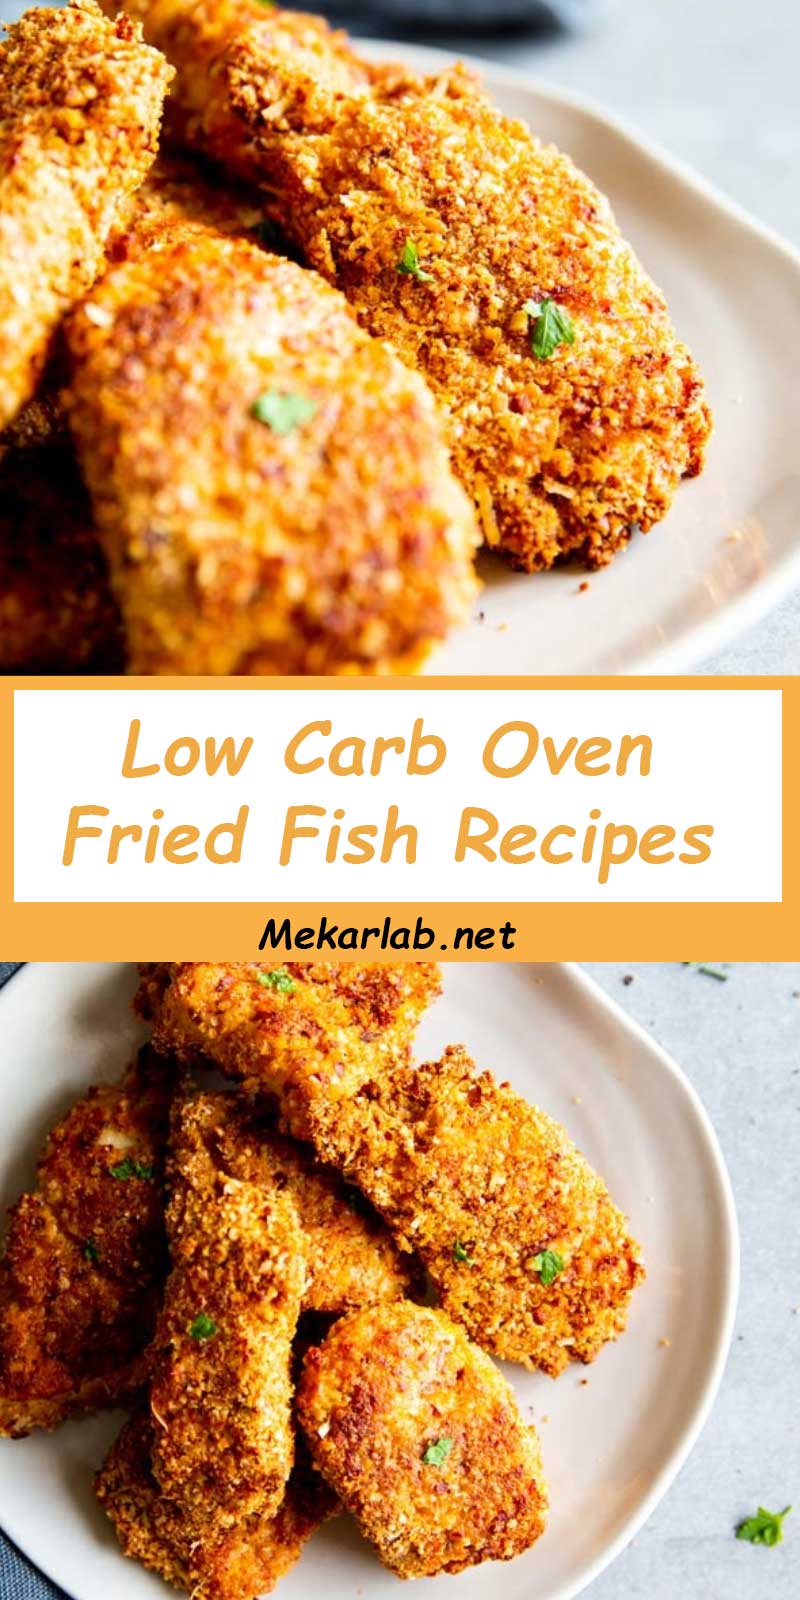 Low Carb Oven Fried Fish Recipes